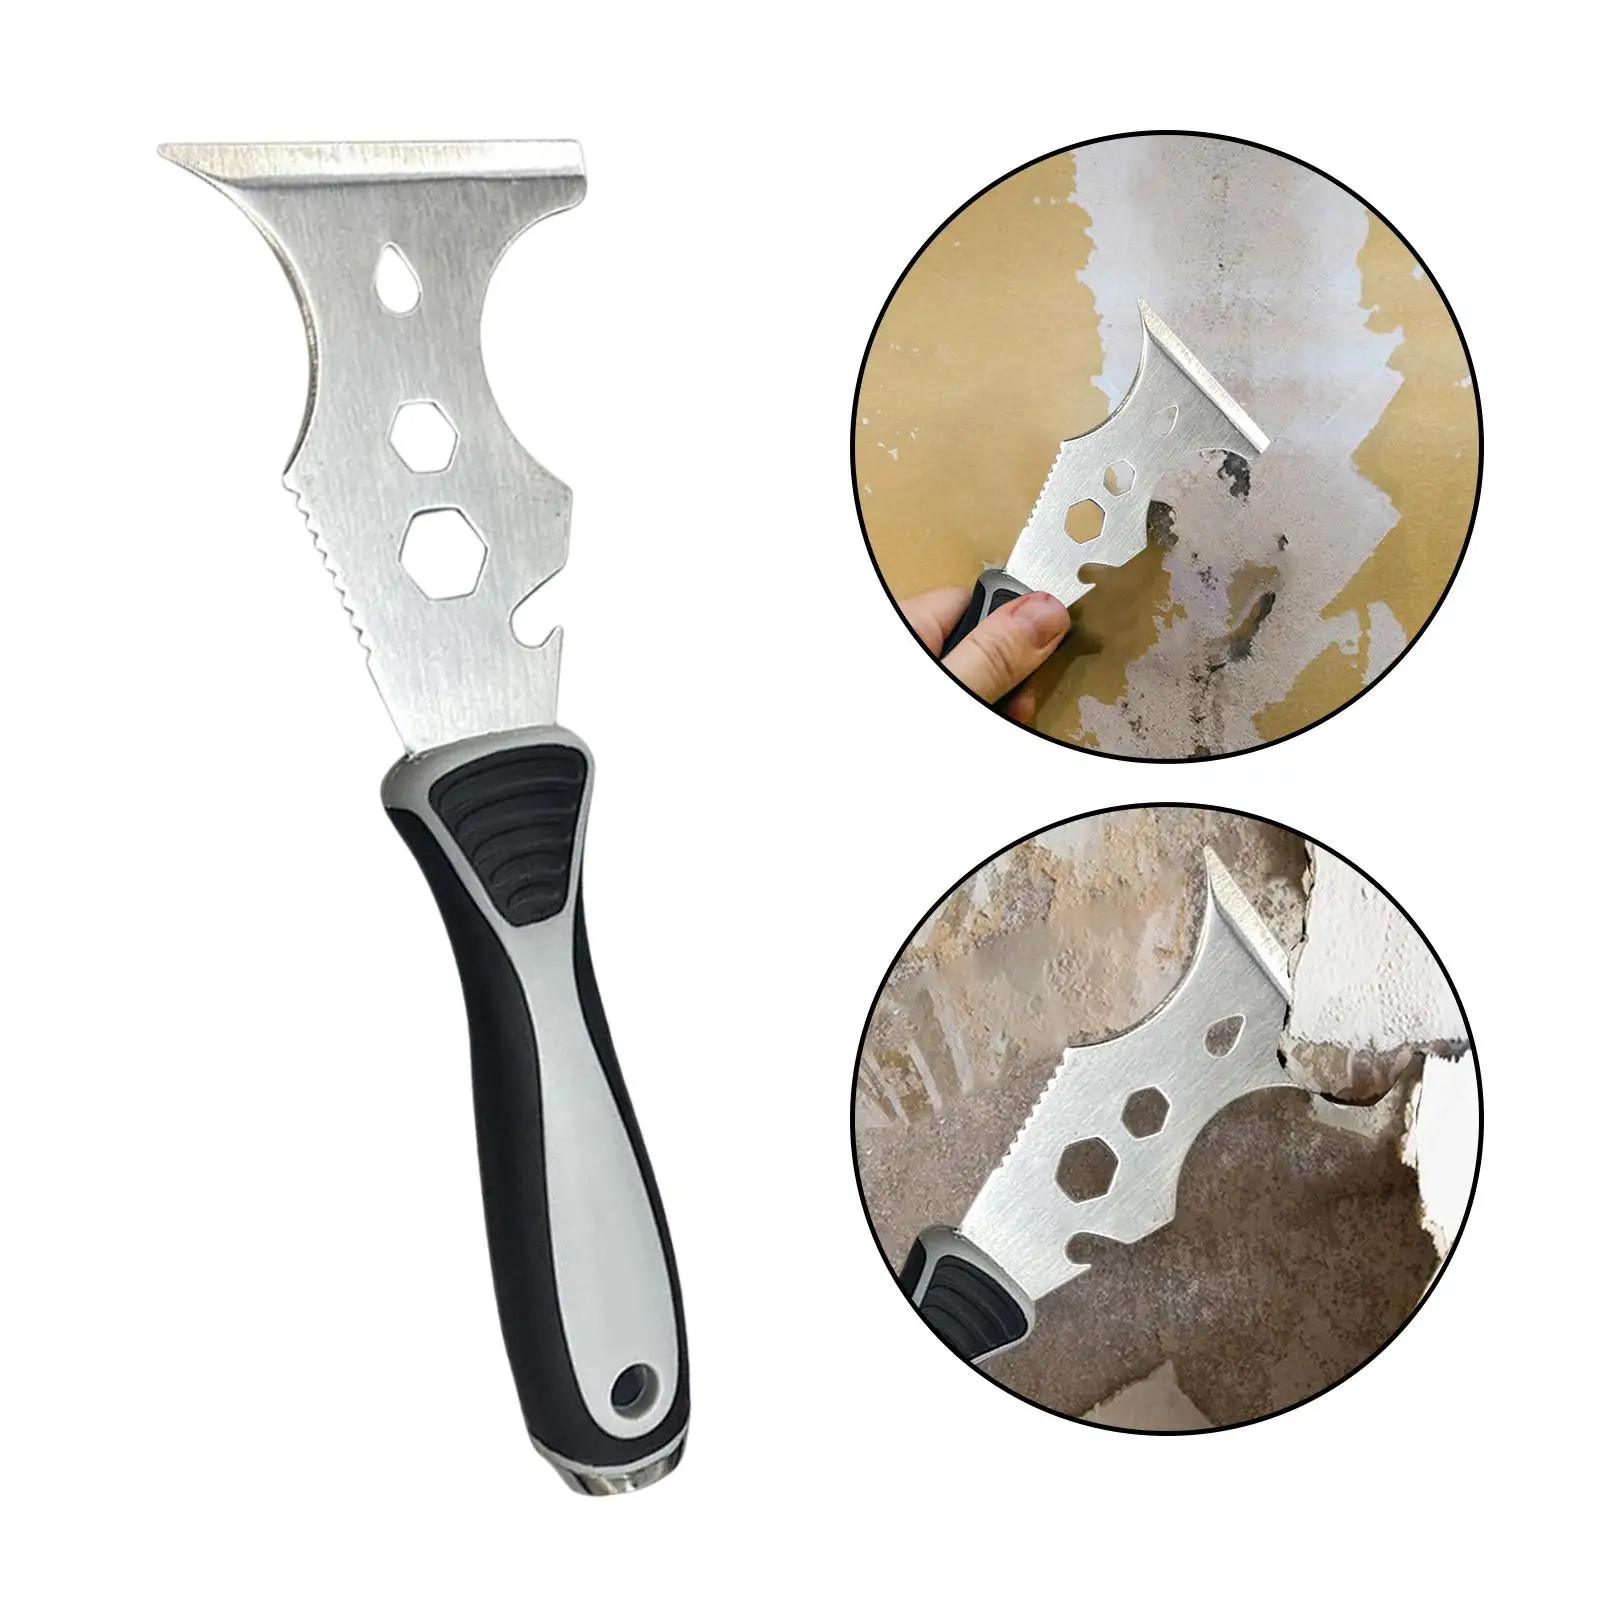 Stainless Steel Paint Scraper Removal Tool Painting Tools Paint Remover Multi Use Putty Knife daily cleaning Repair